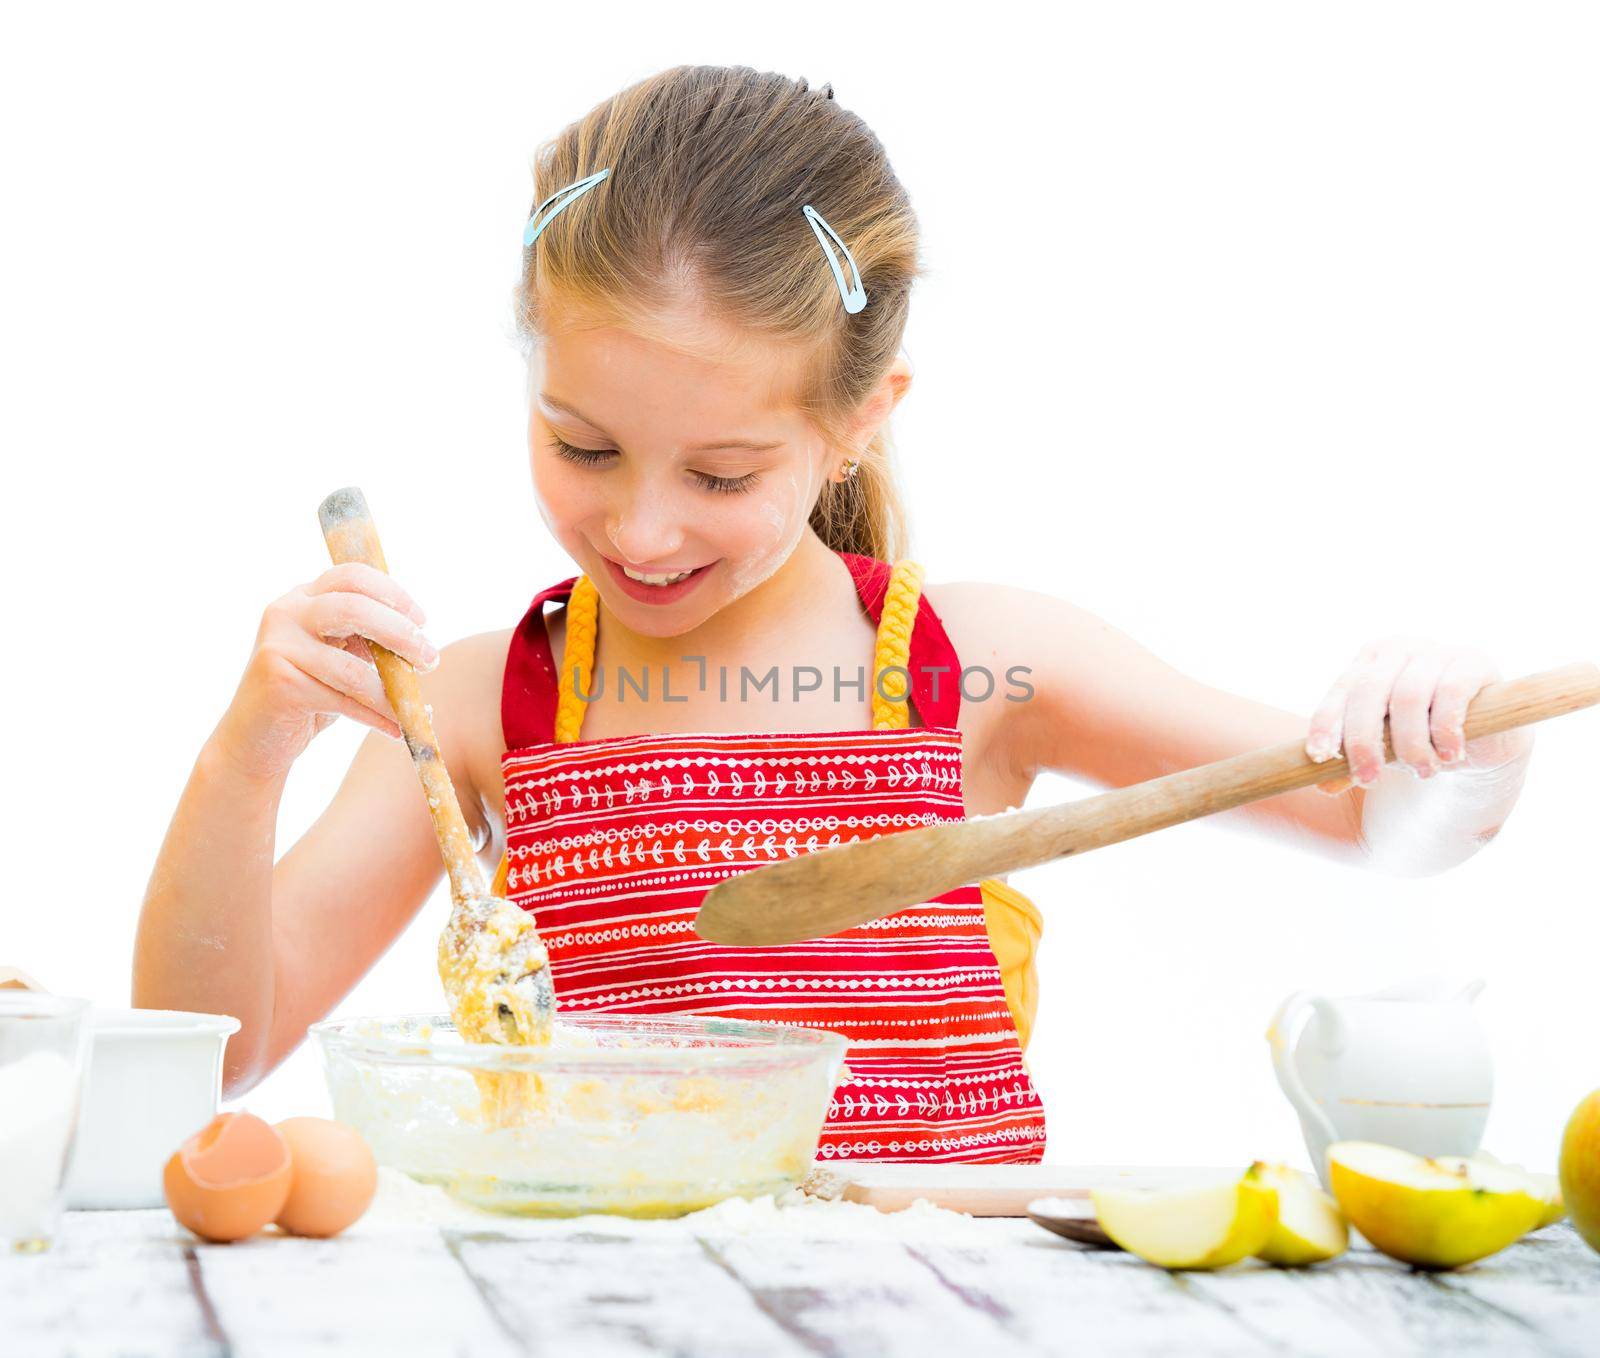 cutre little girl making dough isolated on a white background